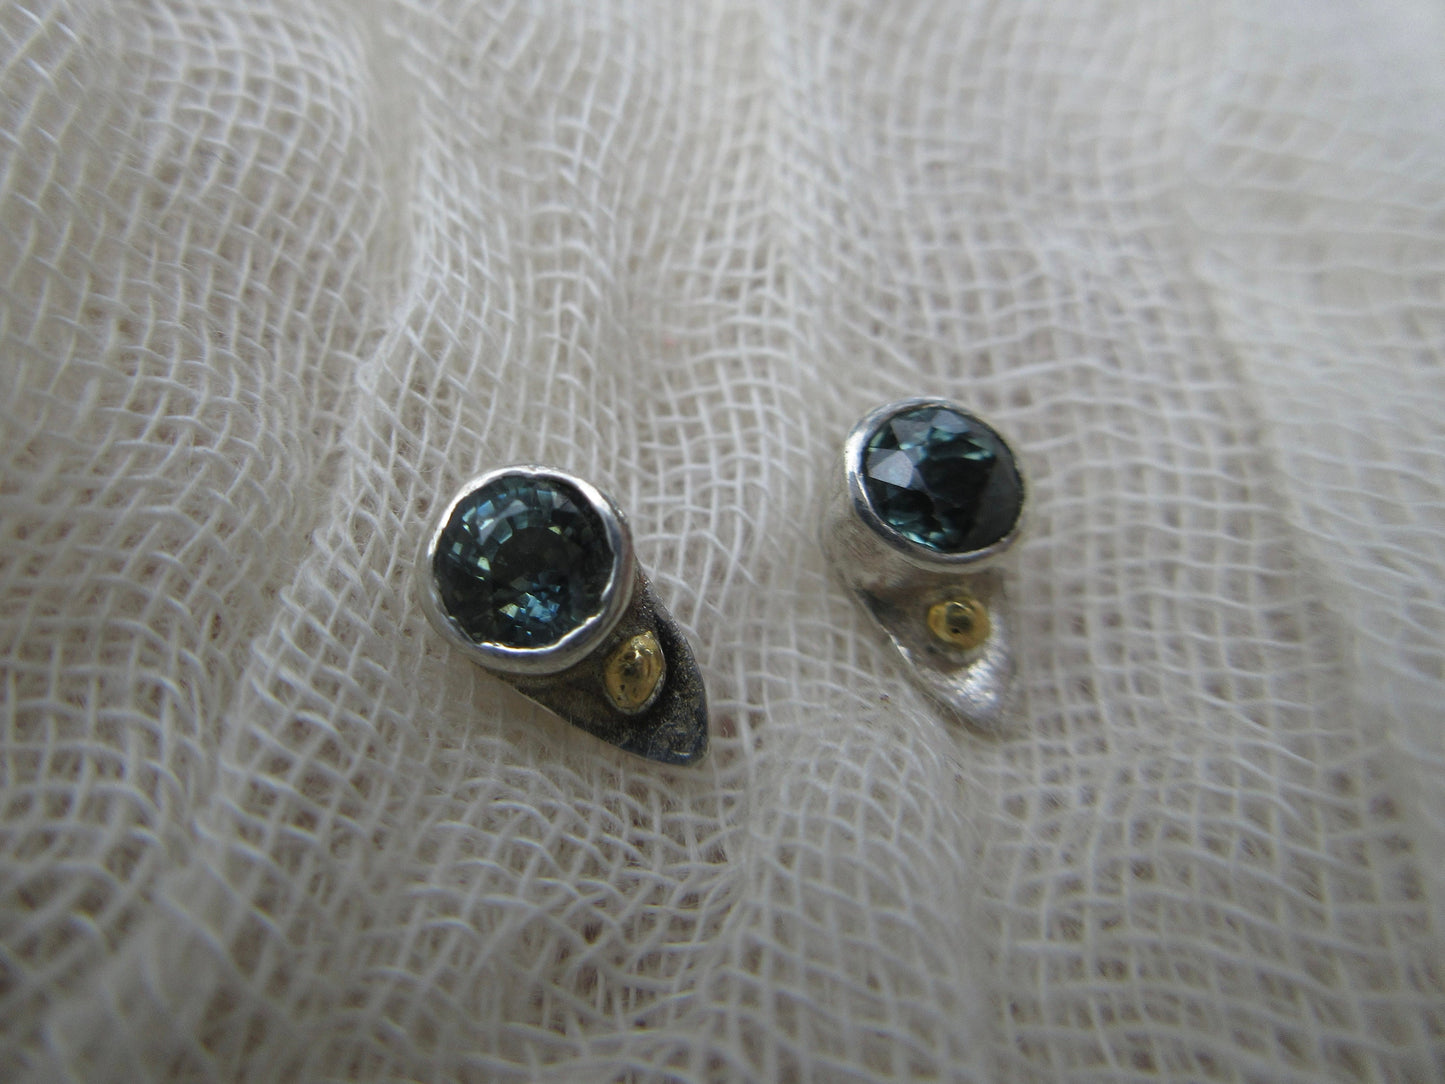 Sapphire stud earrings in argentium sterling silver and 24 karat gold